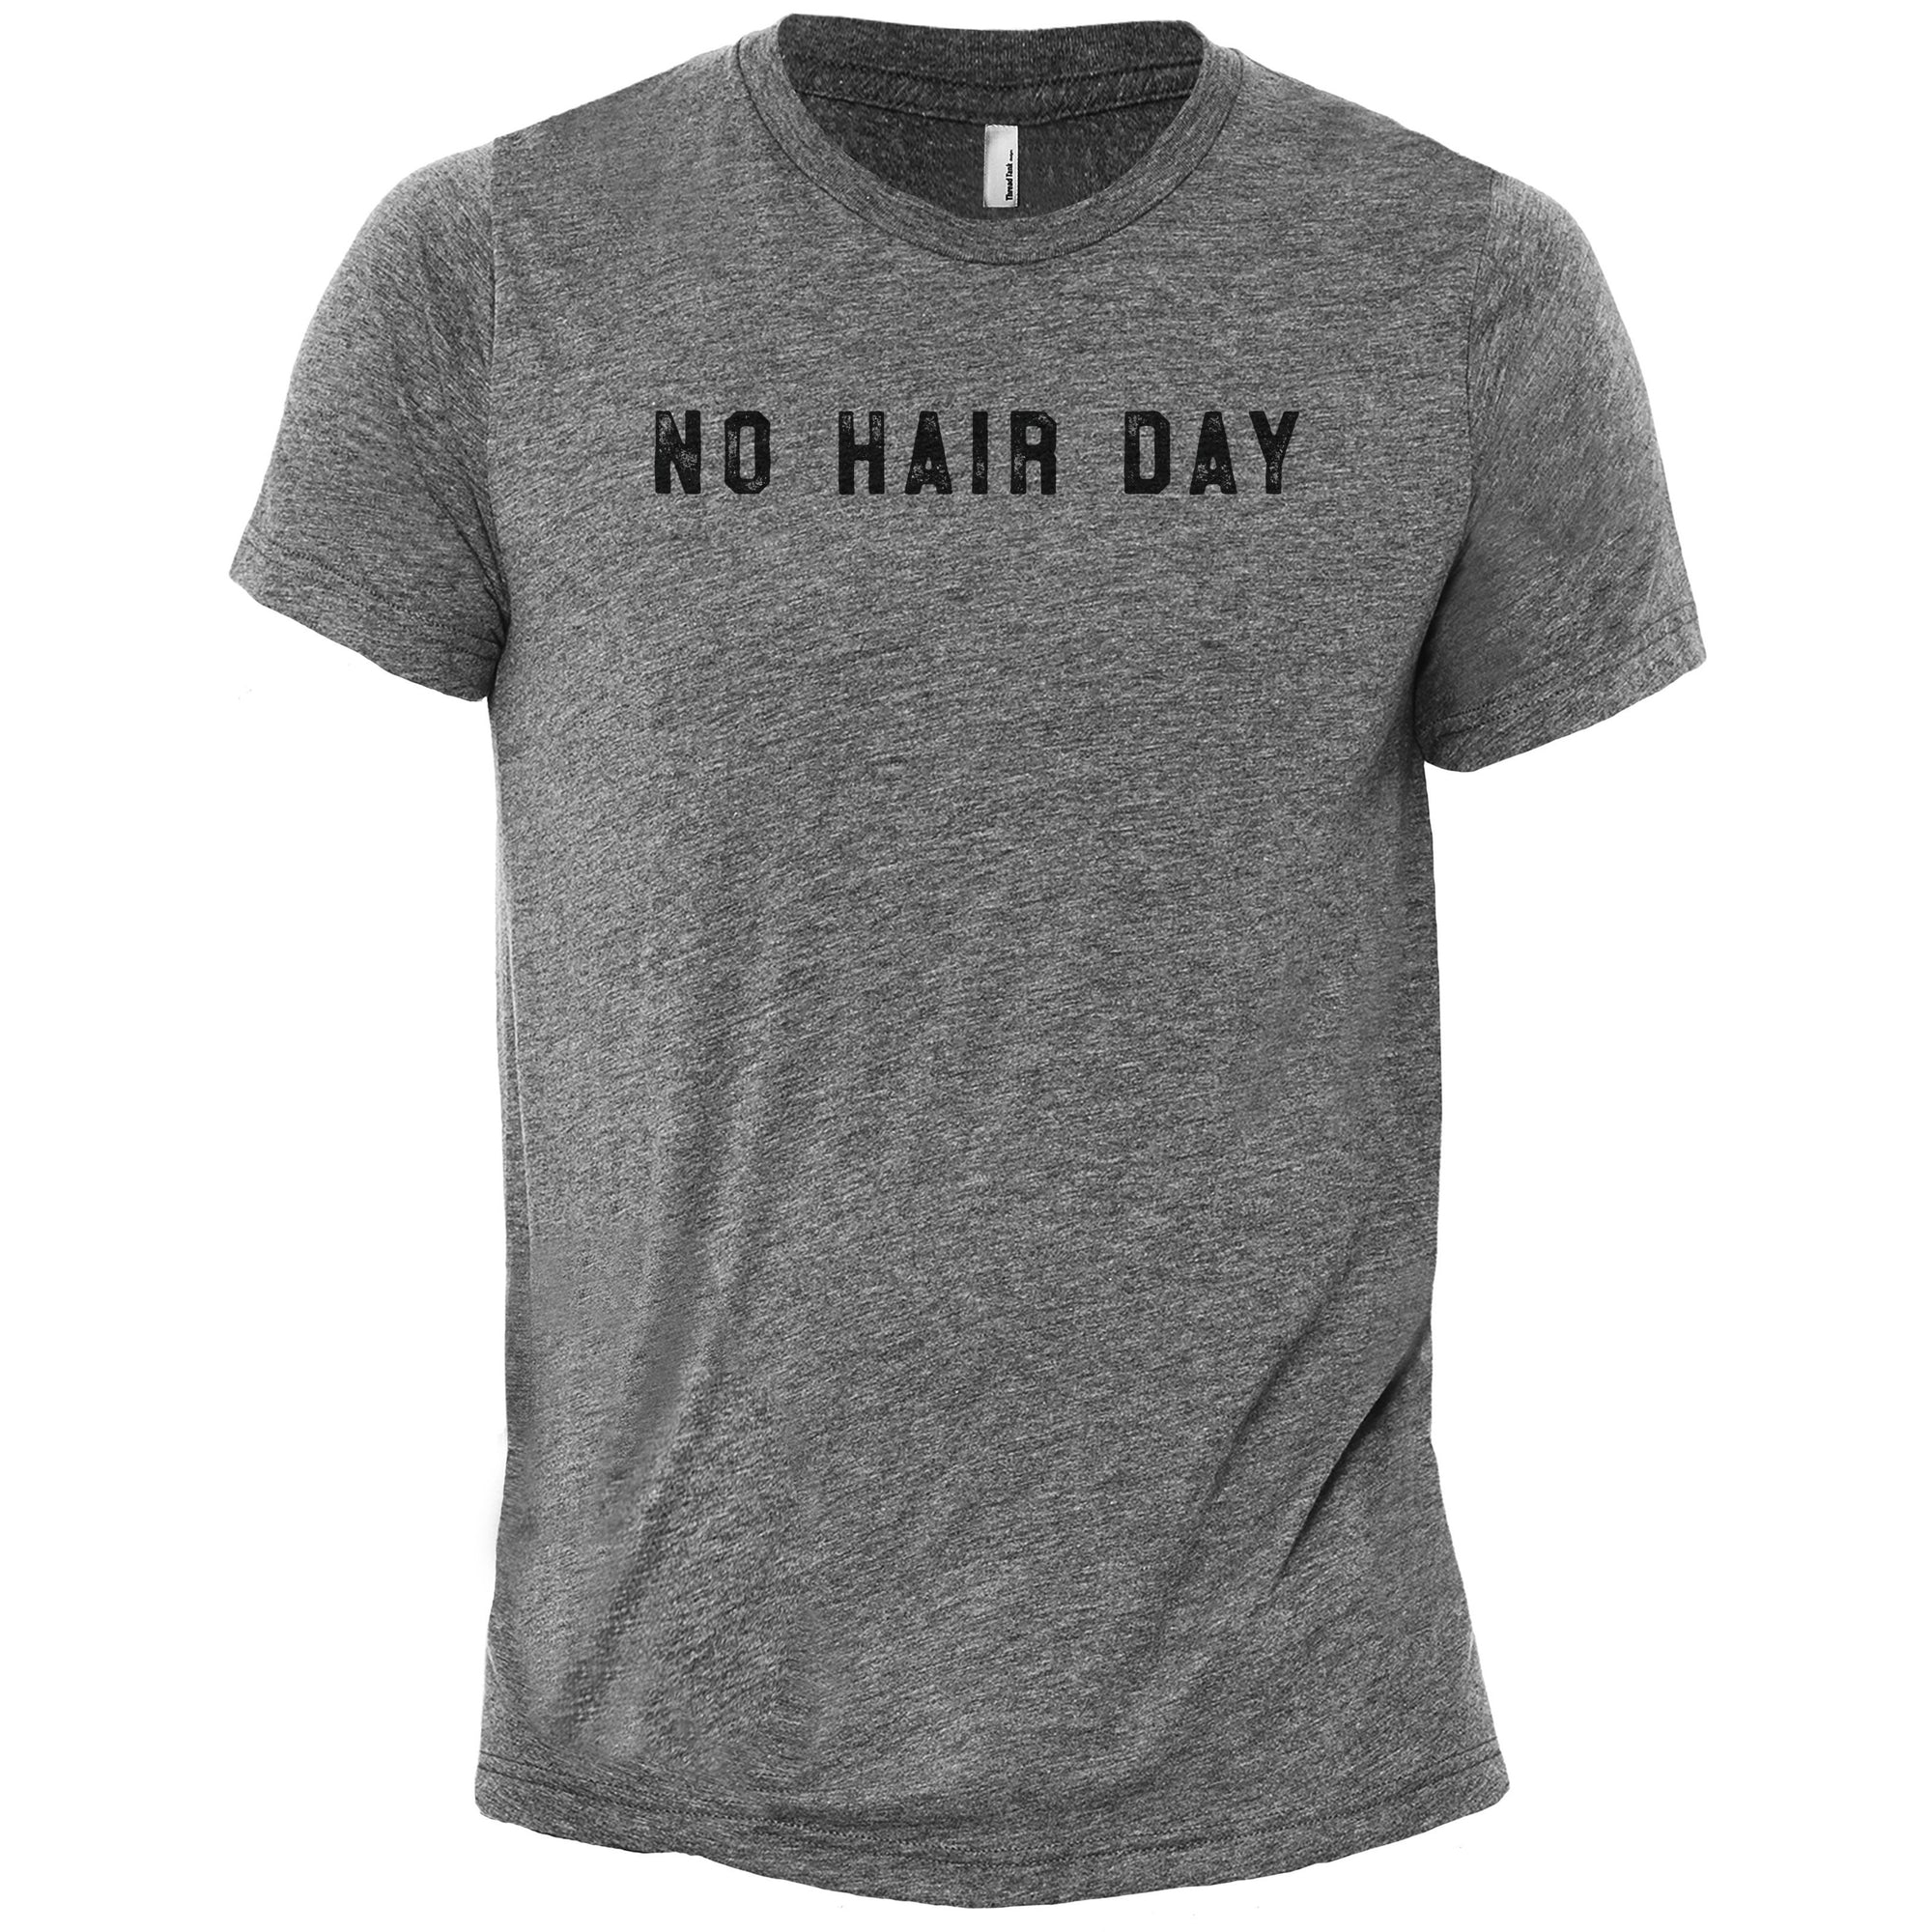 No Hair Day Heather Grey Printed Graphic Men's Crew T-Shirt Tee